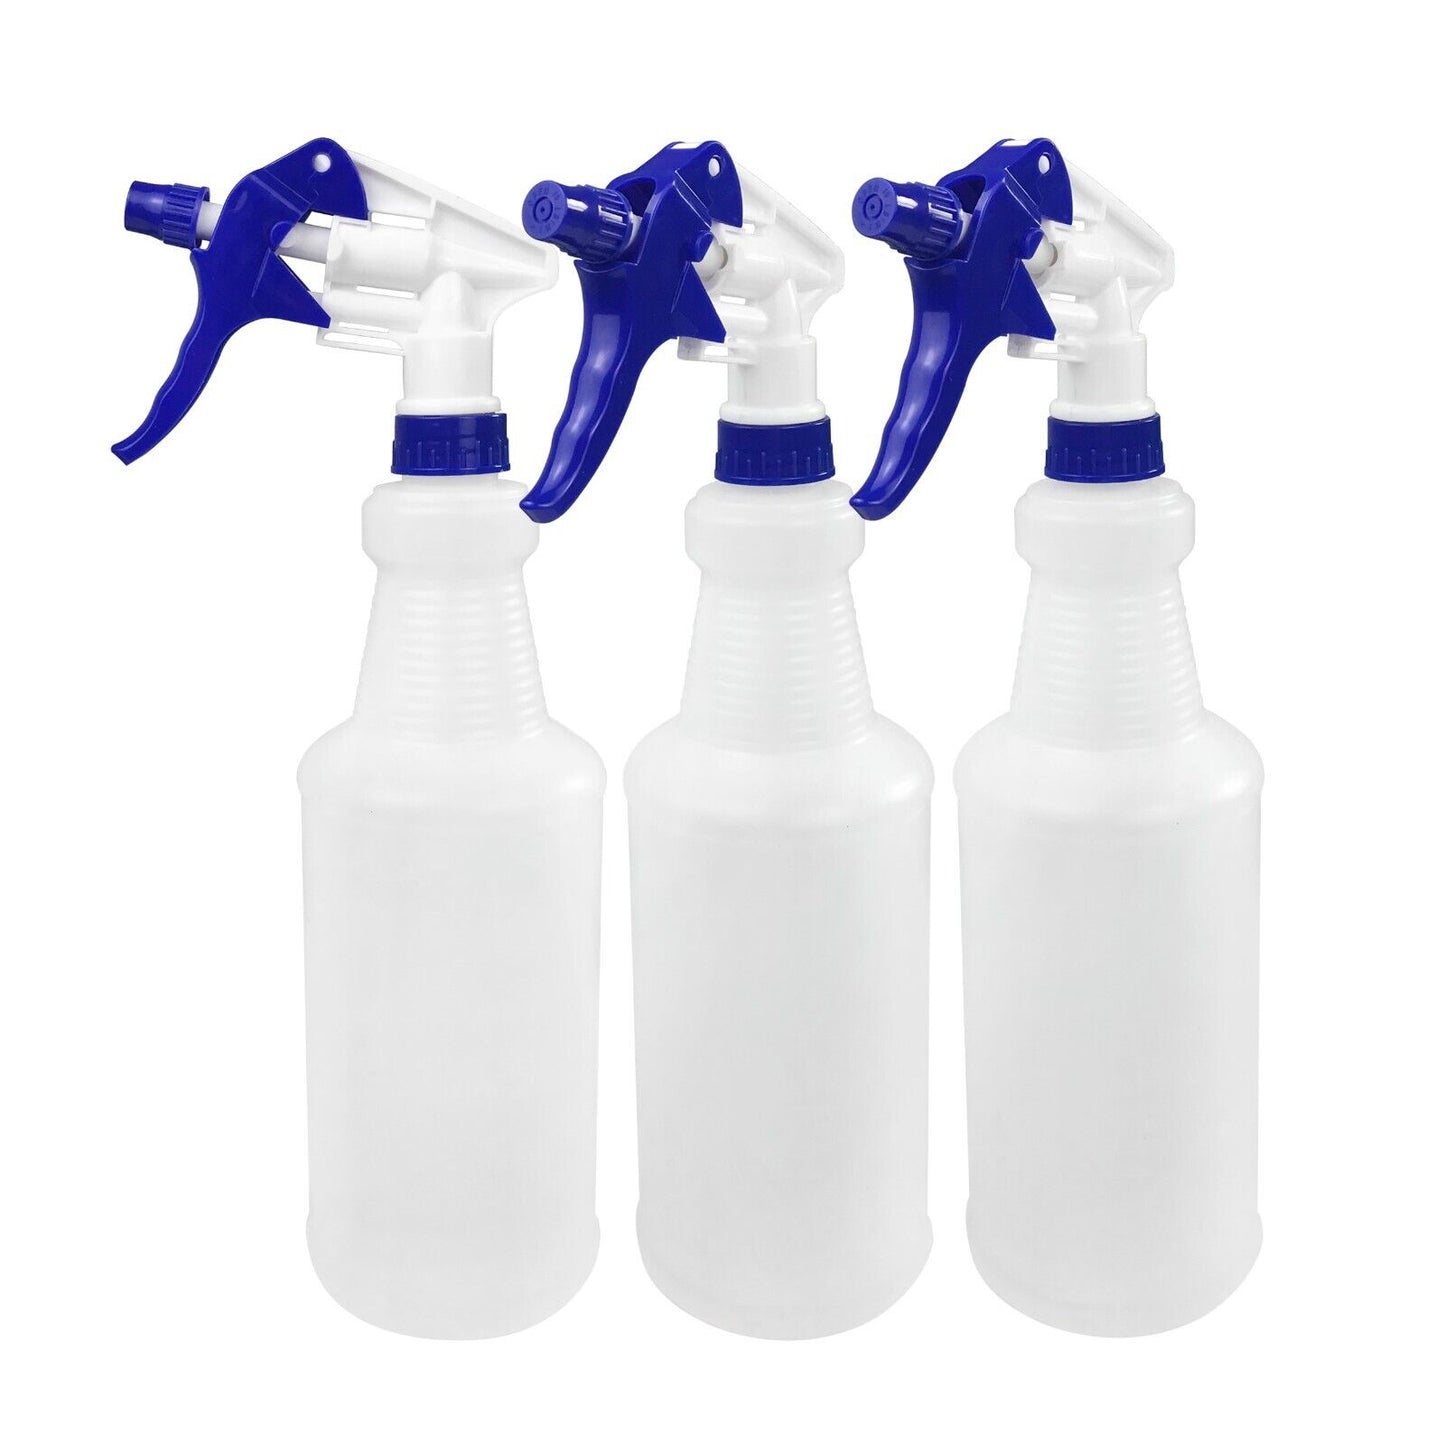 4-products Spray Bottle, Chemical Proportioner with locking cage, 8134-4B-7970